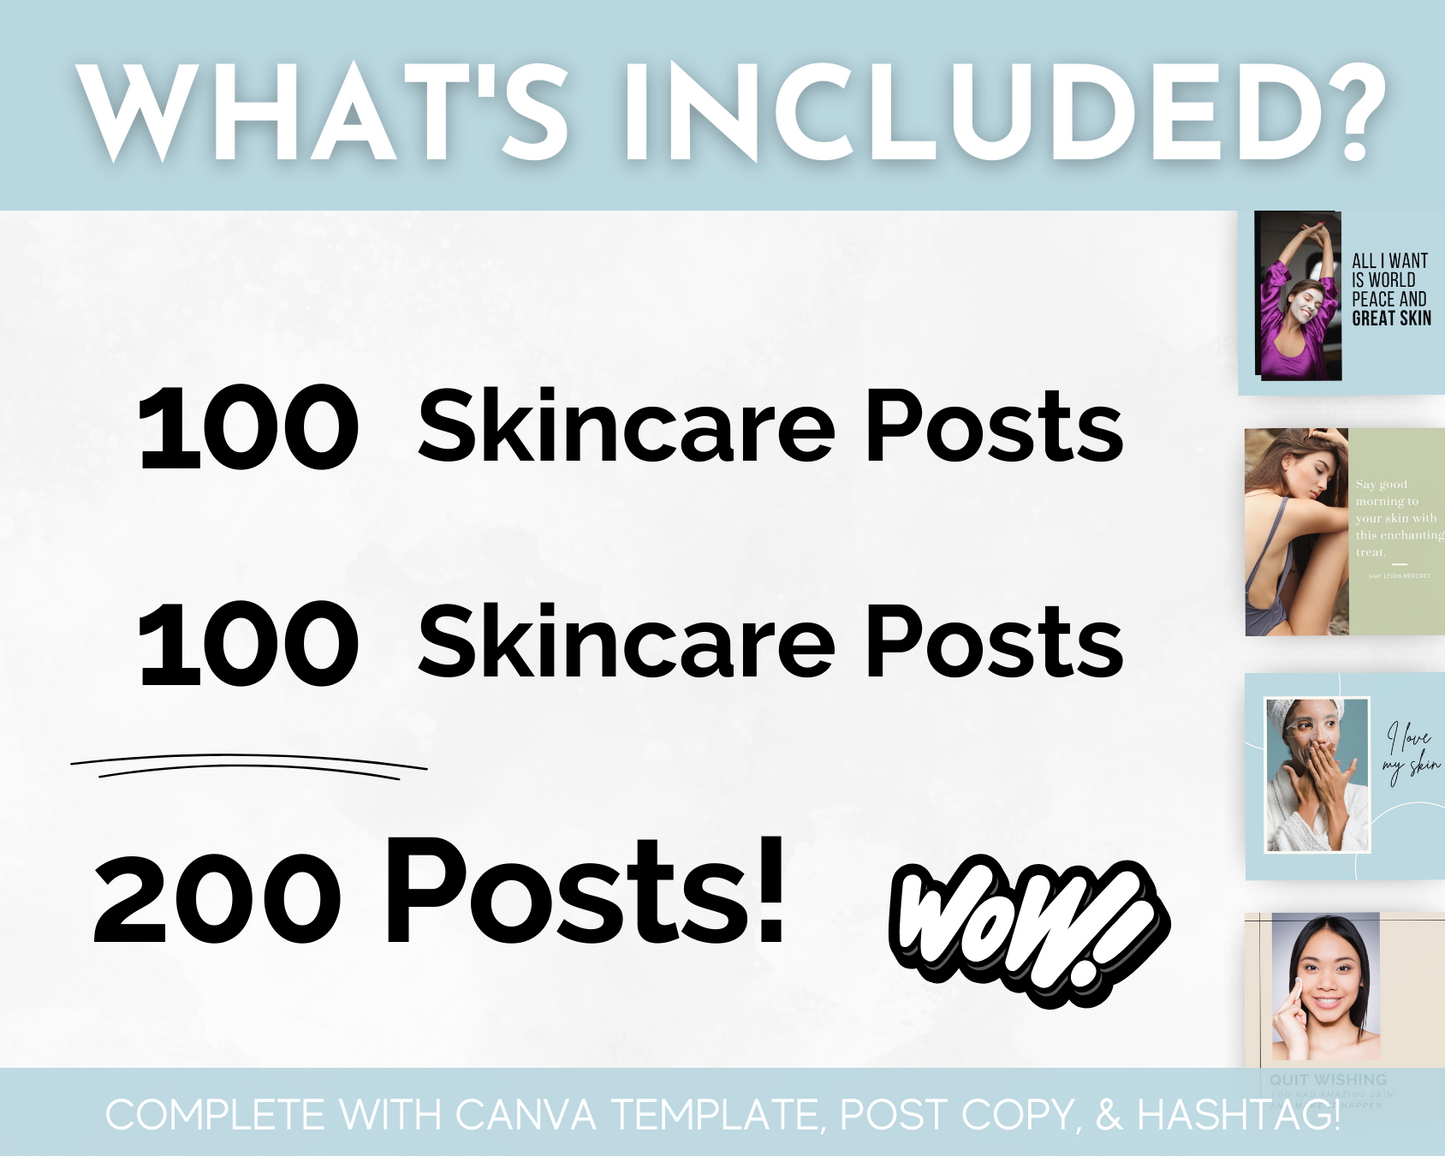 What's included - 100 Skincare Social Media Post Bundle with Canva Templates by Socially Inclined.